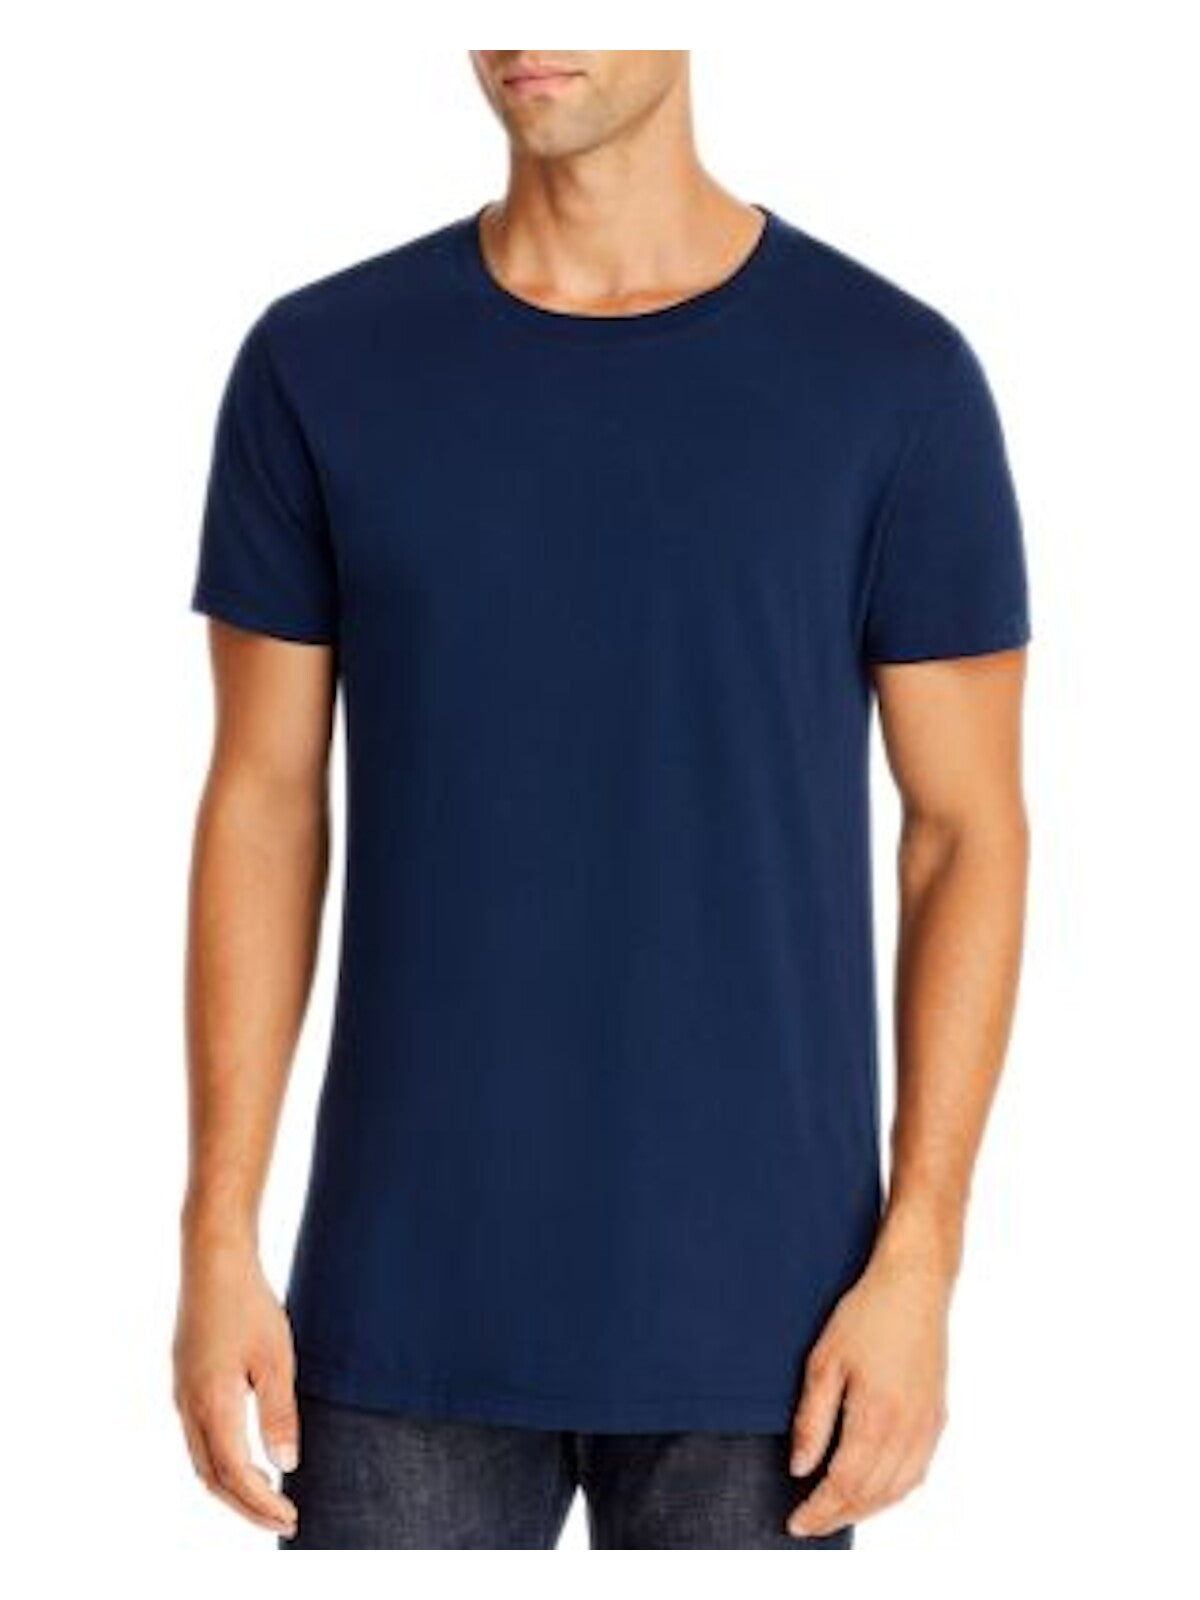 Pacific and Park Mens Navy Classic Fit Cotton T-Shirt S